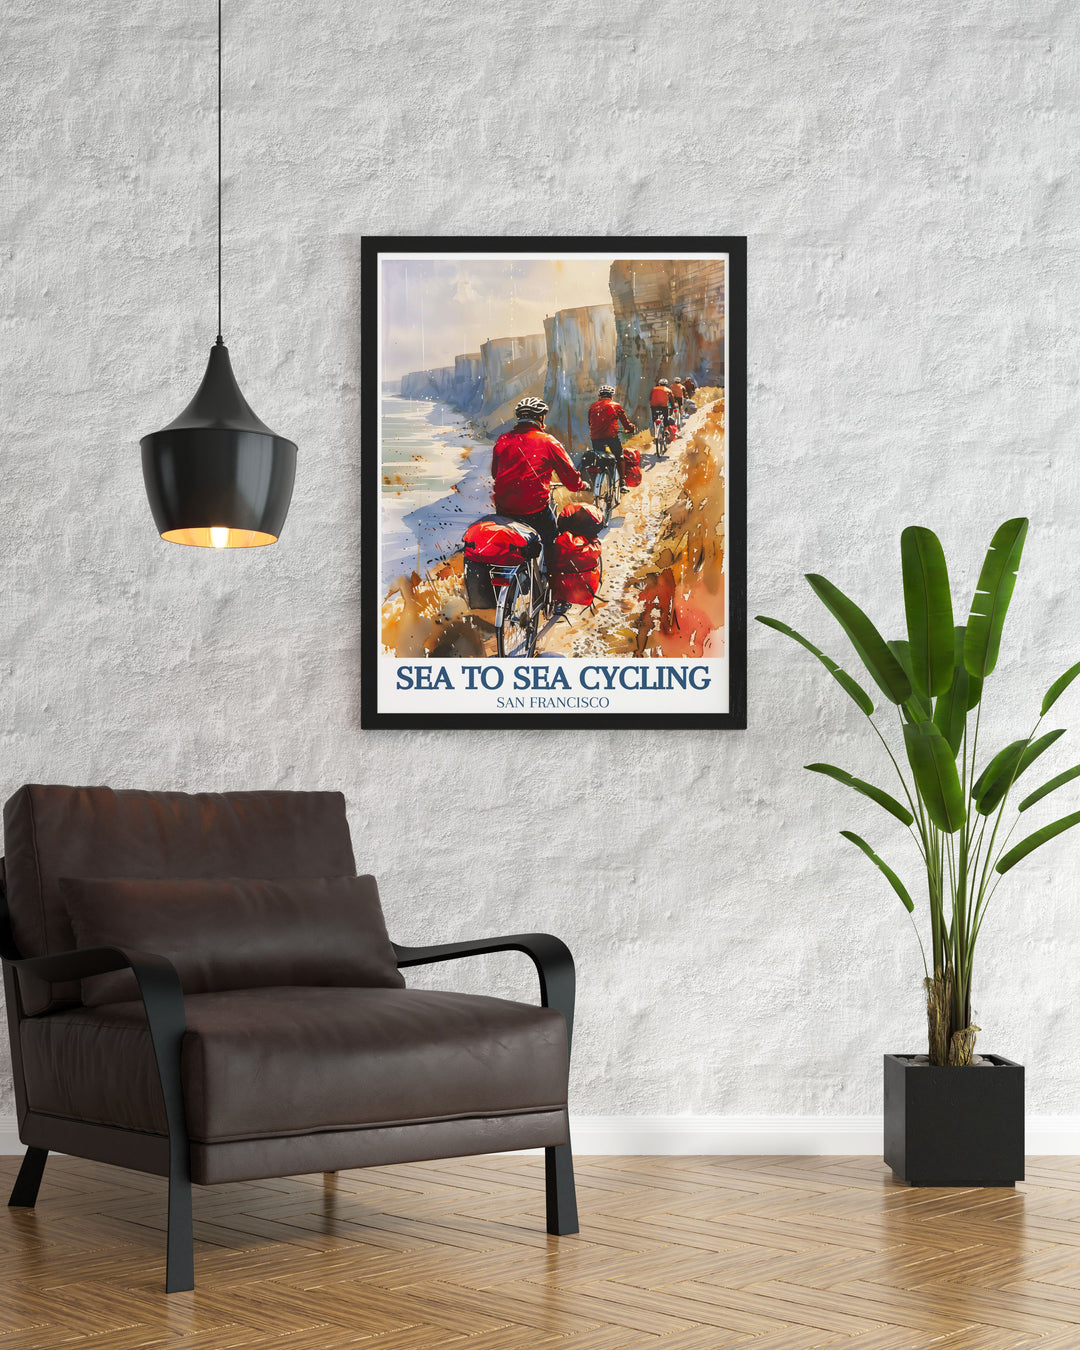 The Sea to Sea Cycling Route is beautifully illustrated in this poster, highlighting the iconic Cliffs of Dover and the peaceful Lake District, making it perfect for cycle touring enthusiasts.